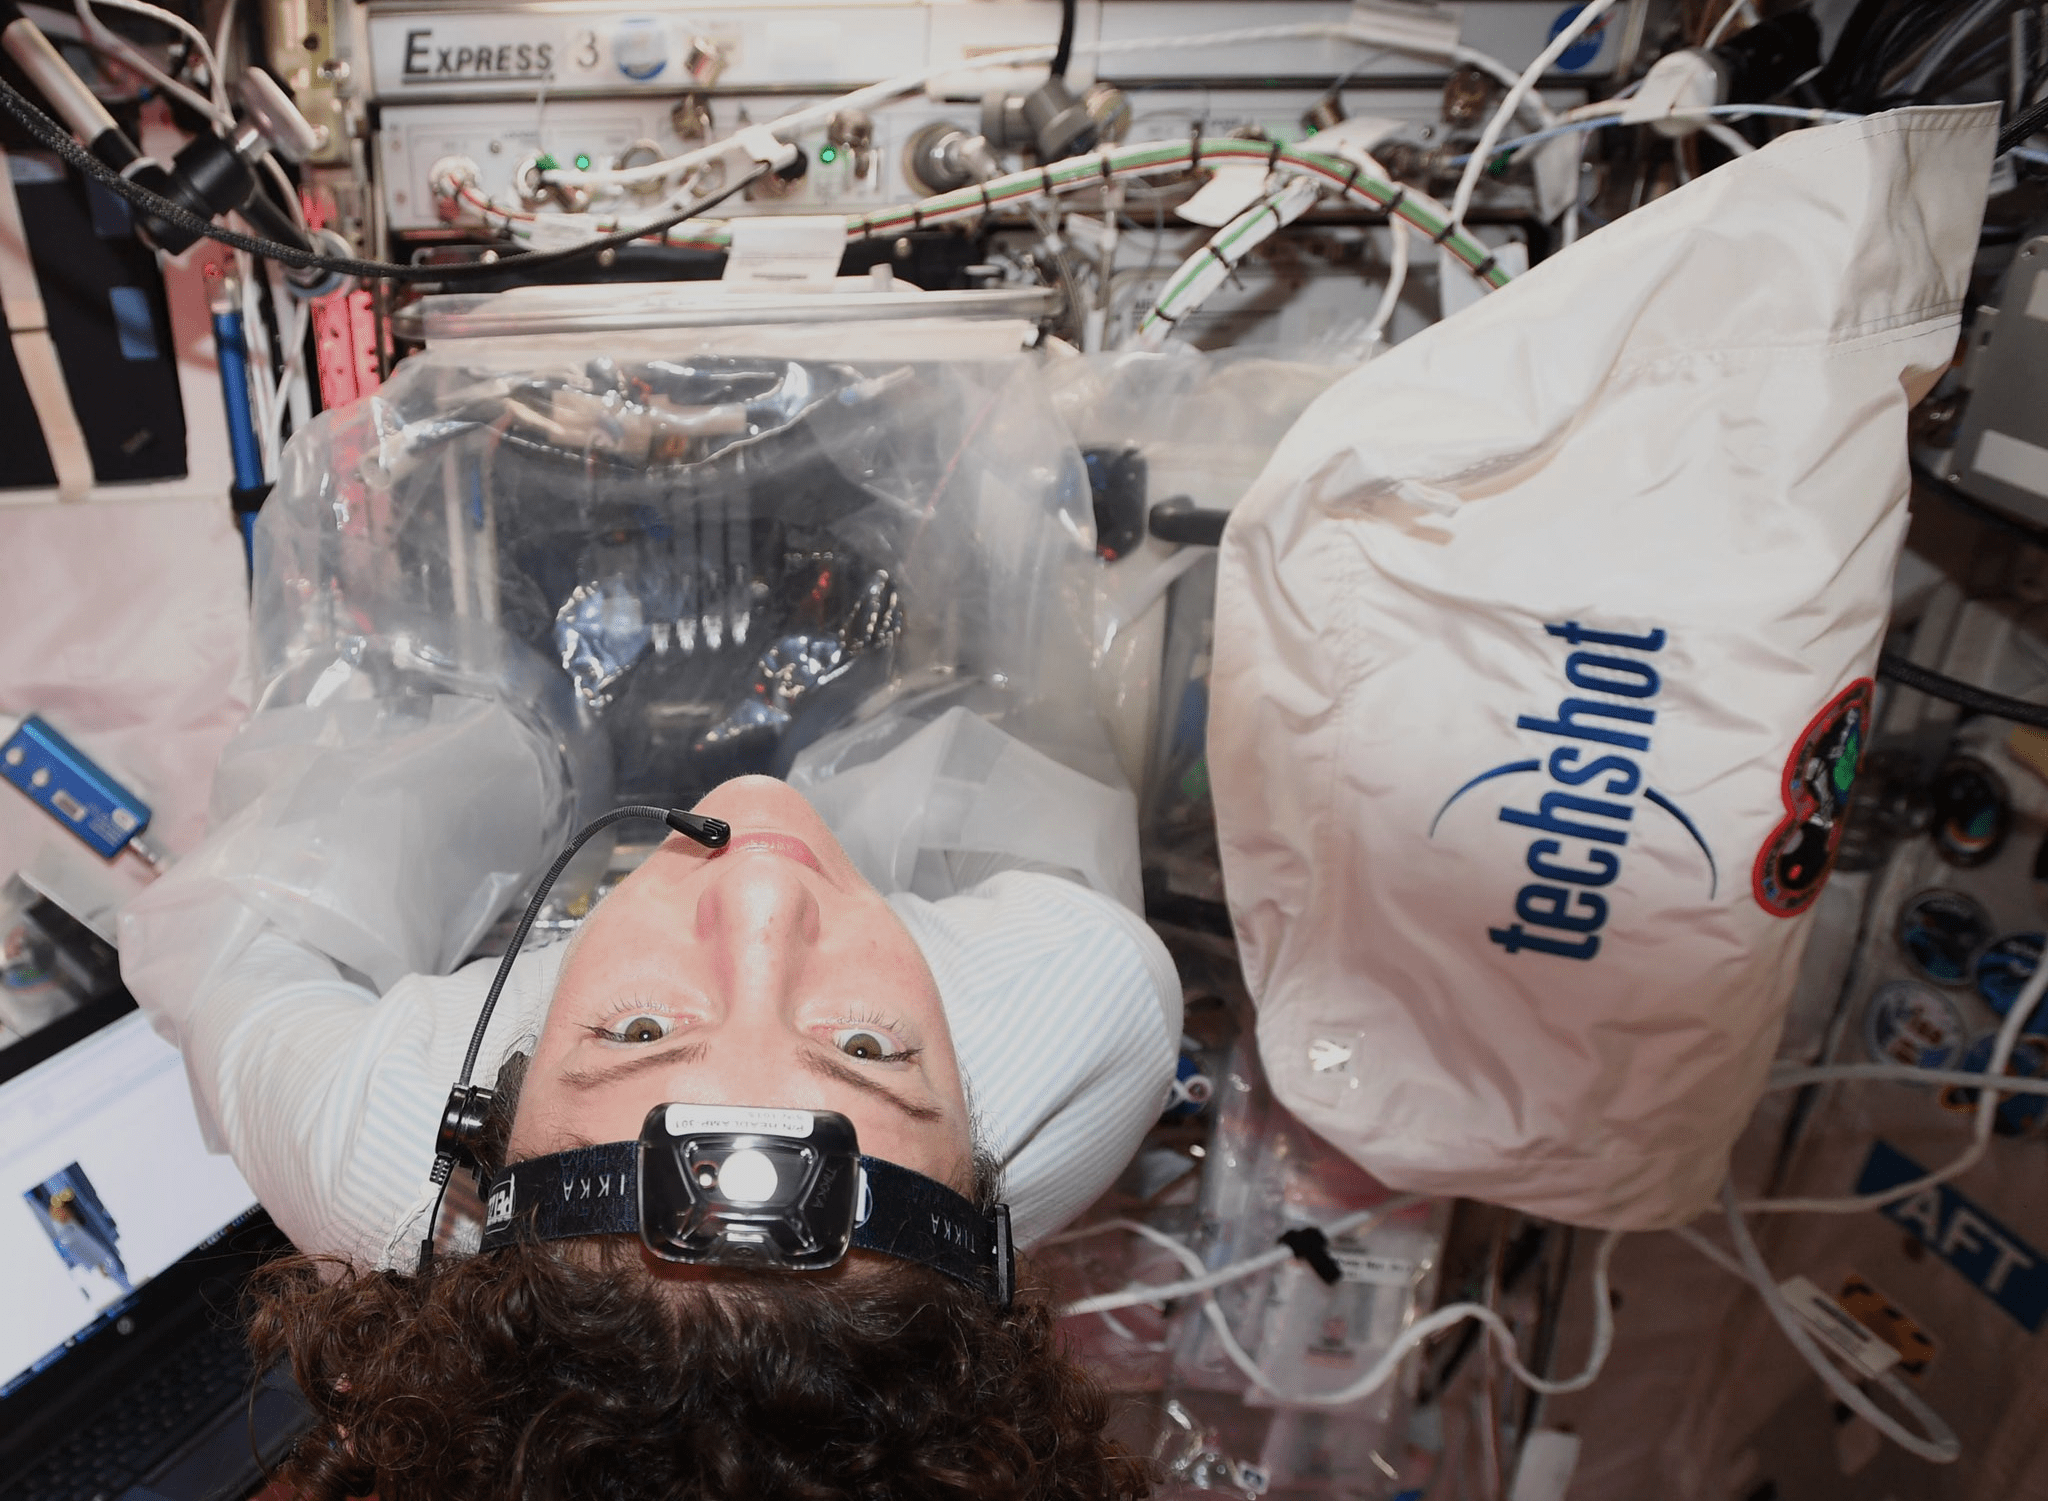 BFF in use on the ISS by Jessica Meir